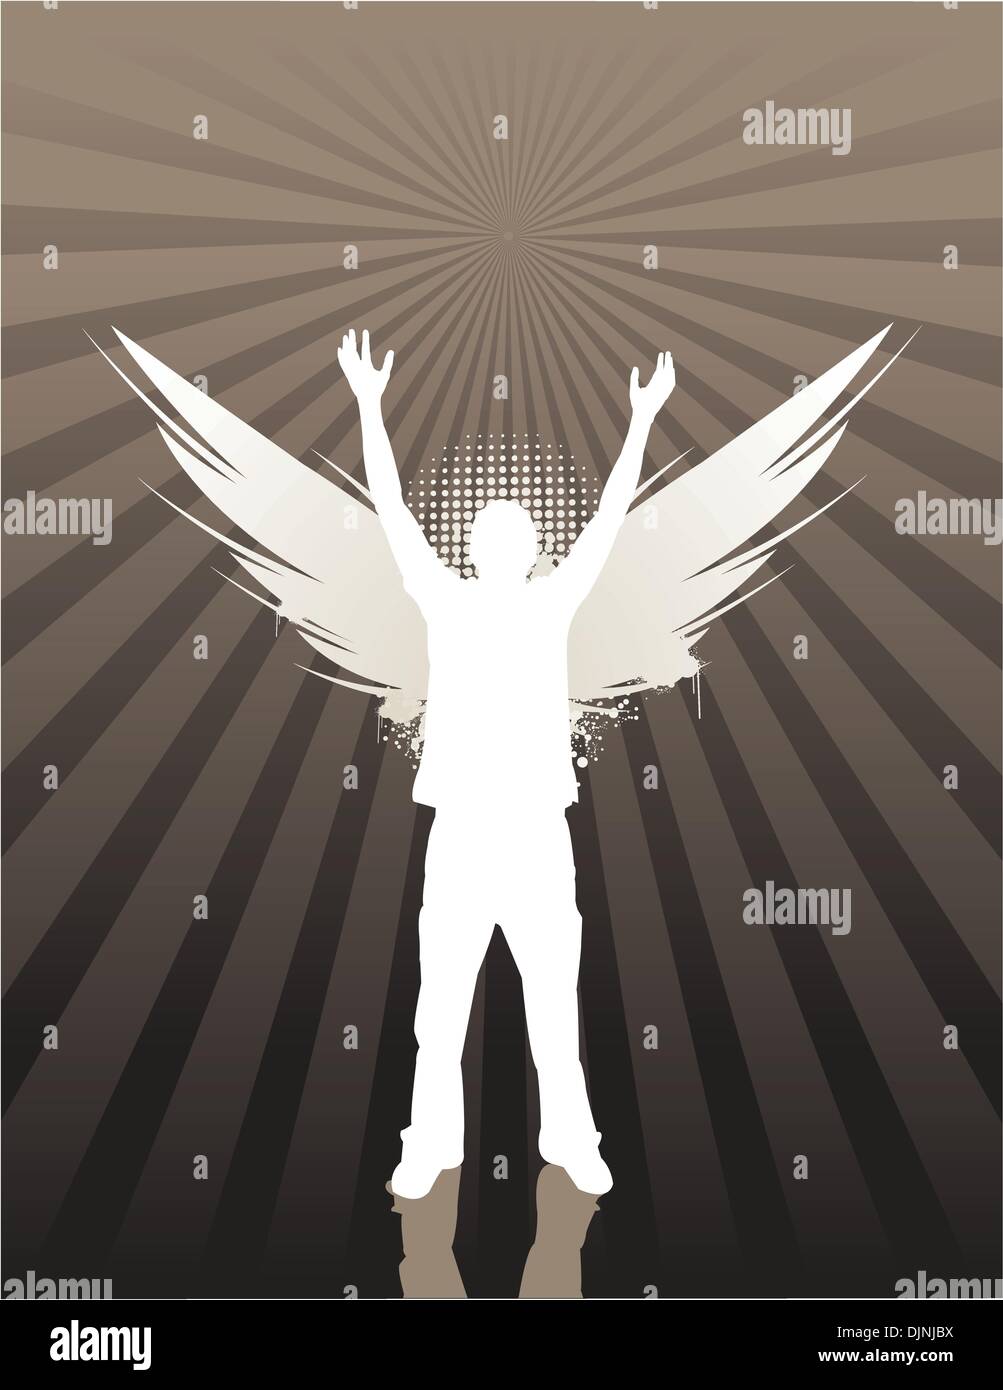 Silhouette of man with wings on rays background. All elements on separate layers, easily edited. Stock Vector